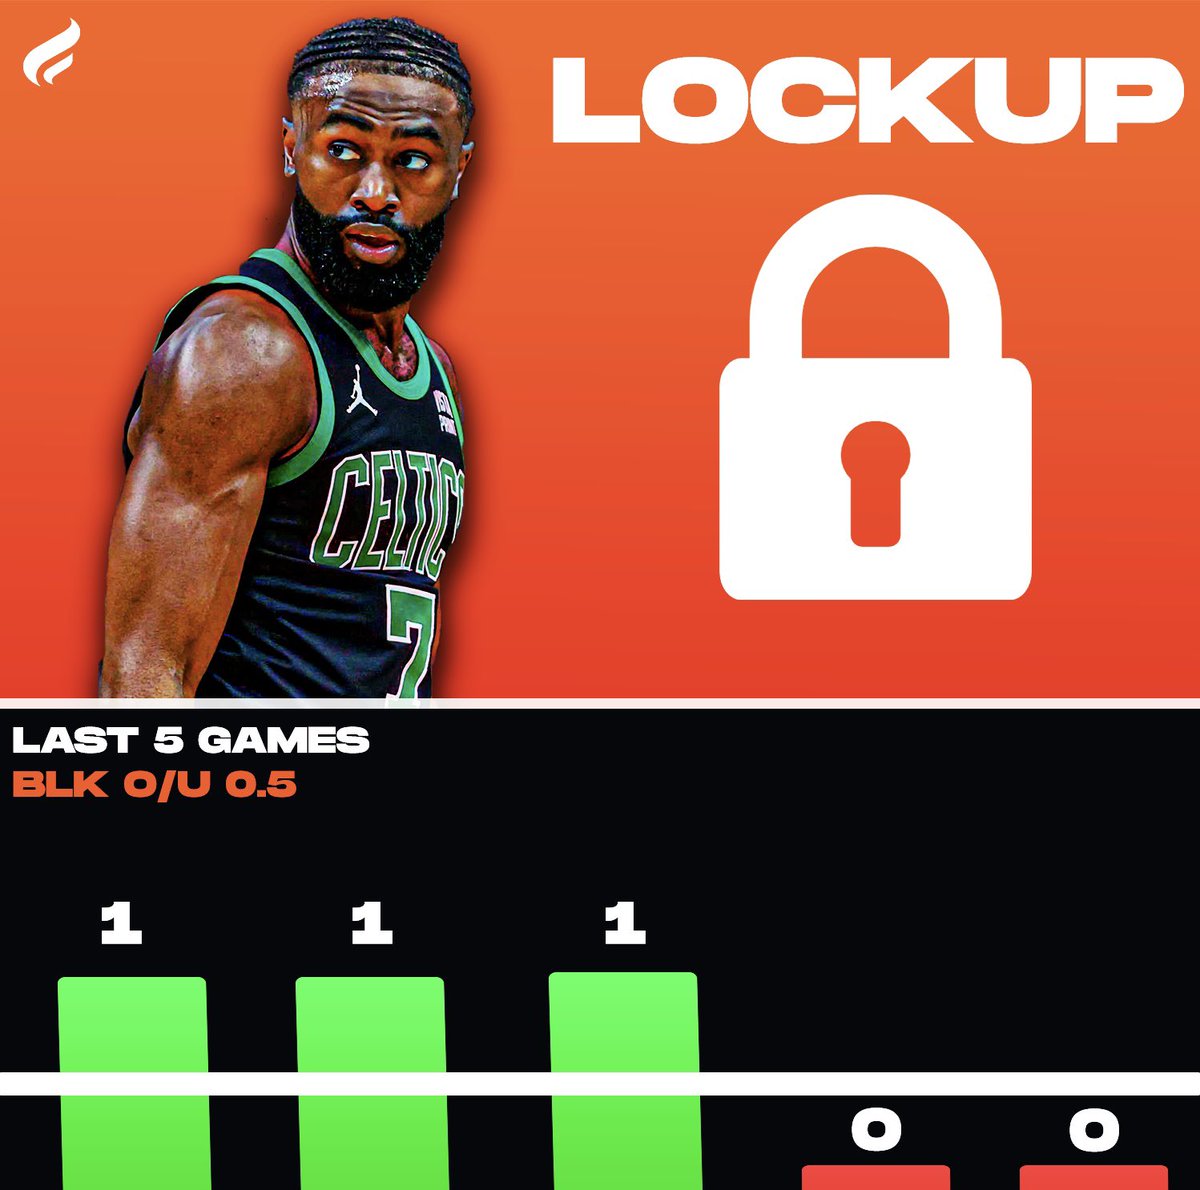 Can Jaylen Brown get back to locking up 🔐

Are you riding over or under 0.5 BLKS❓

Comment your play below  ⬇️ 

#NBA         #nbanews #nbanewsdaily #houstonrockets #nbafinals         #jamesharden #lebronjames #basketball #hoops #hoopmixtape #76ers #nbaontnt #nbaplayoffs